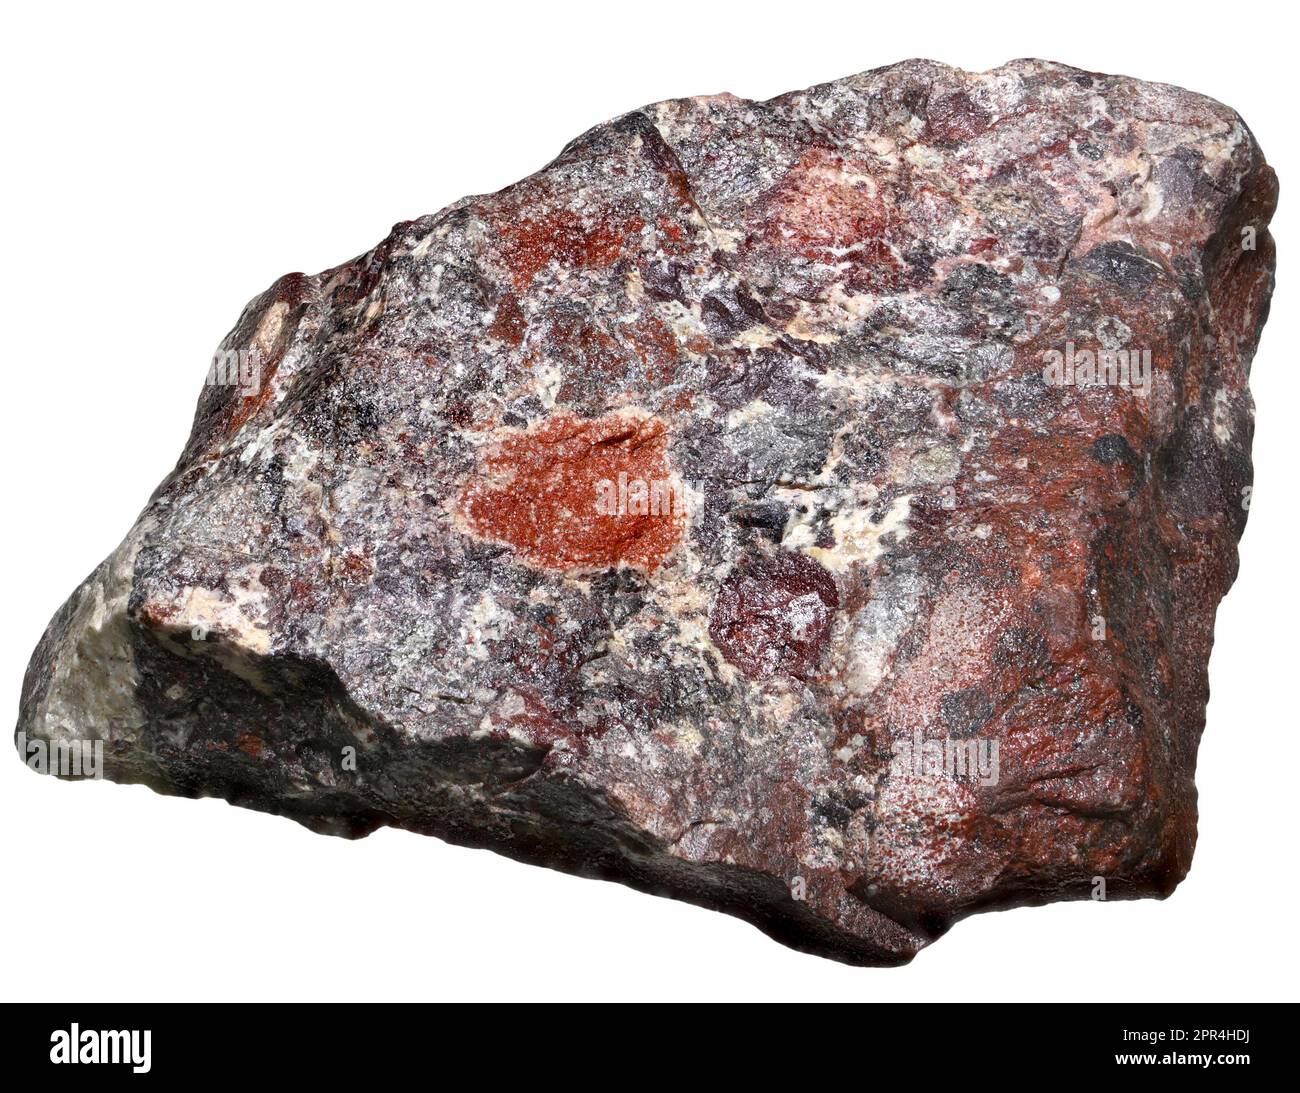 Breccia (South Africa) Sedimentary rock composed of broken fragments of minerals or rock cemented together by a fine-grained matrix Stock Photo